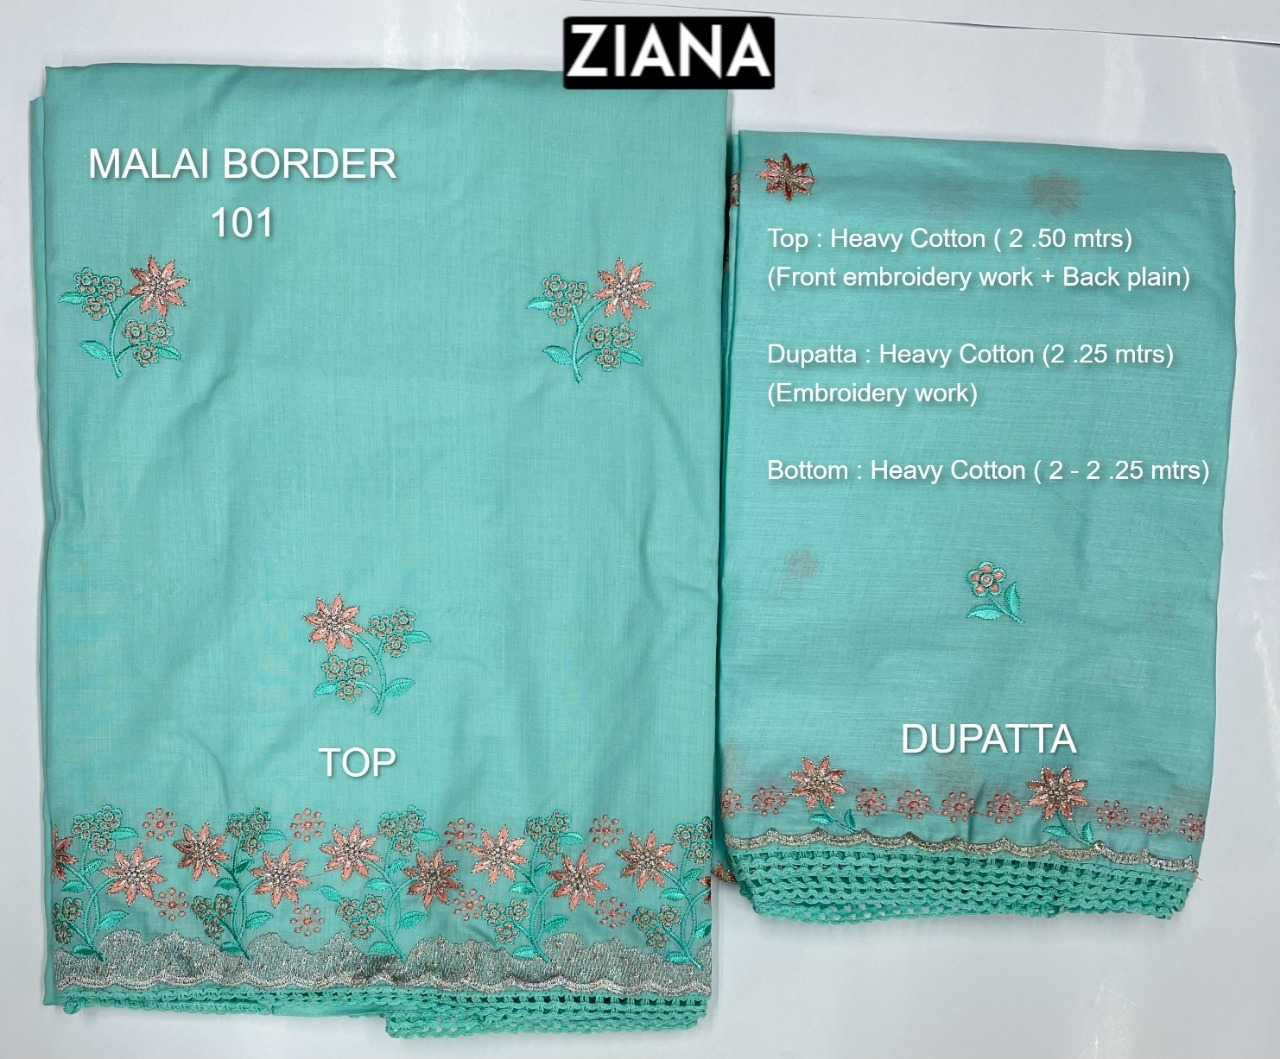 ziana malai border 101 heavy cotton catchy look embroidery salwar suit colour set